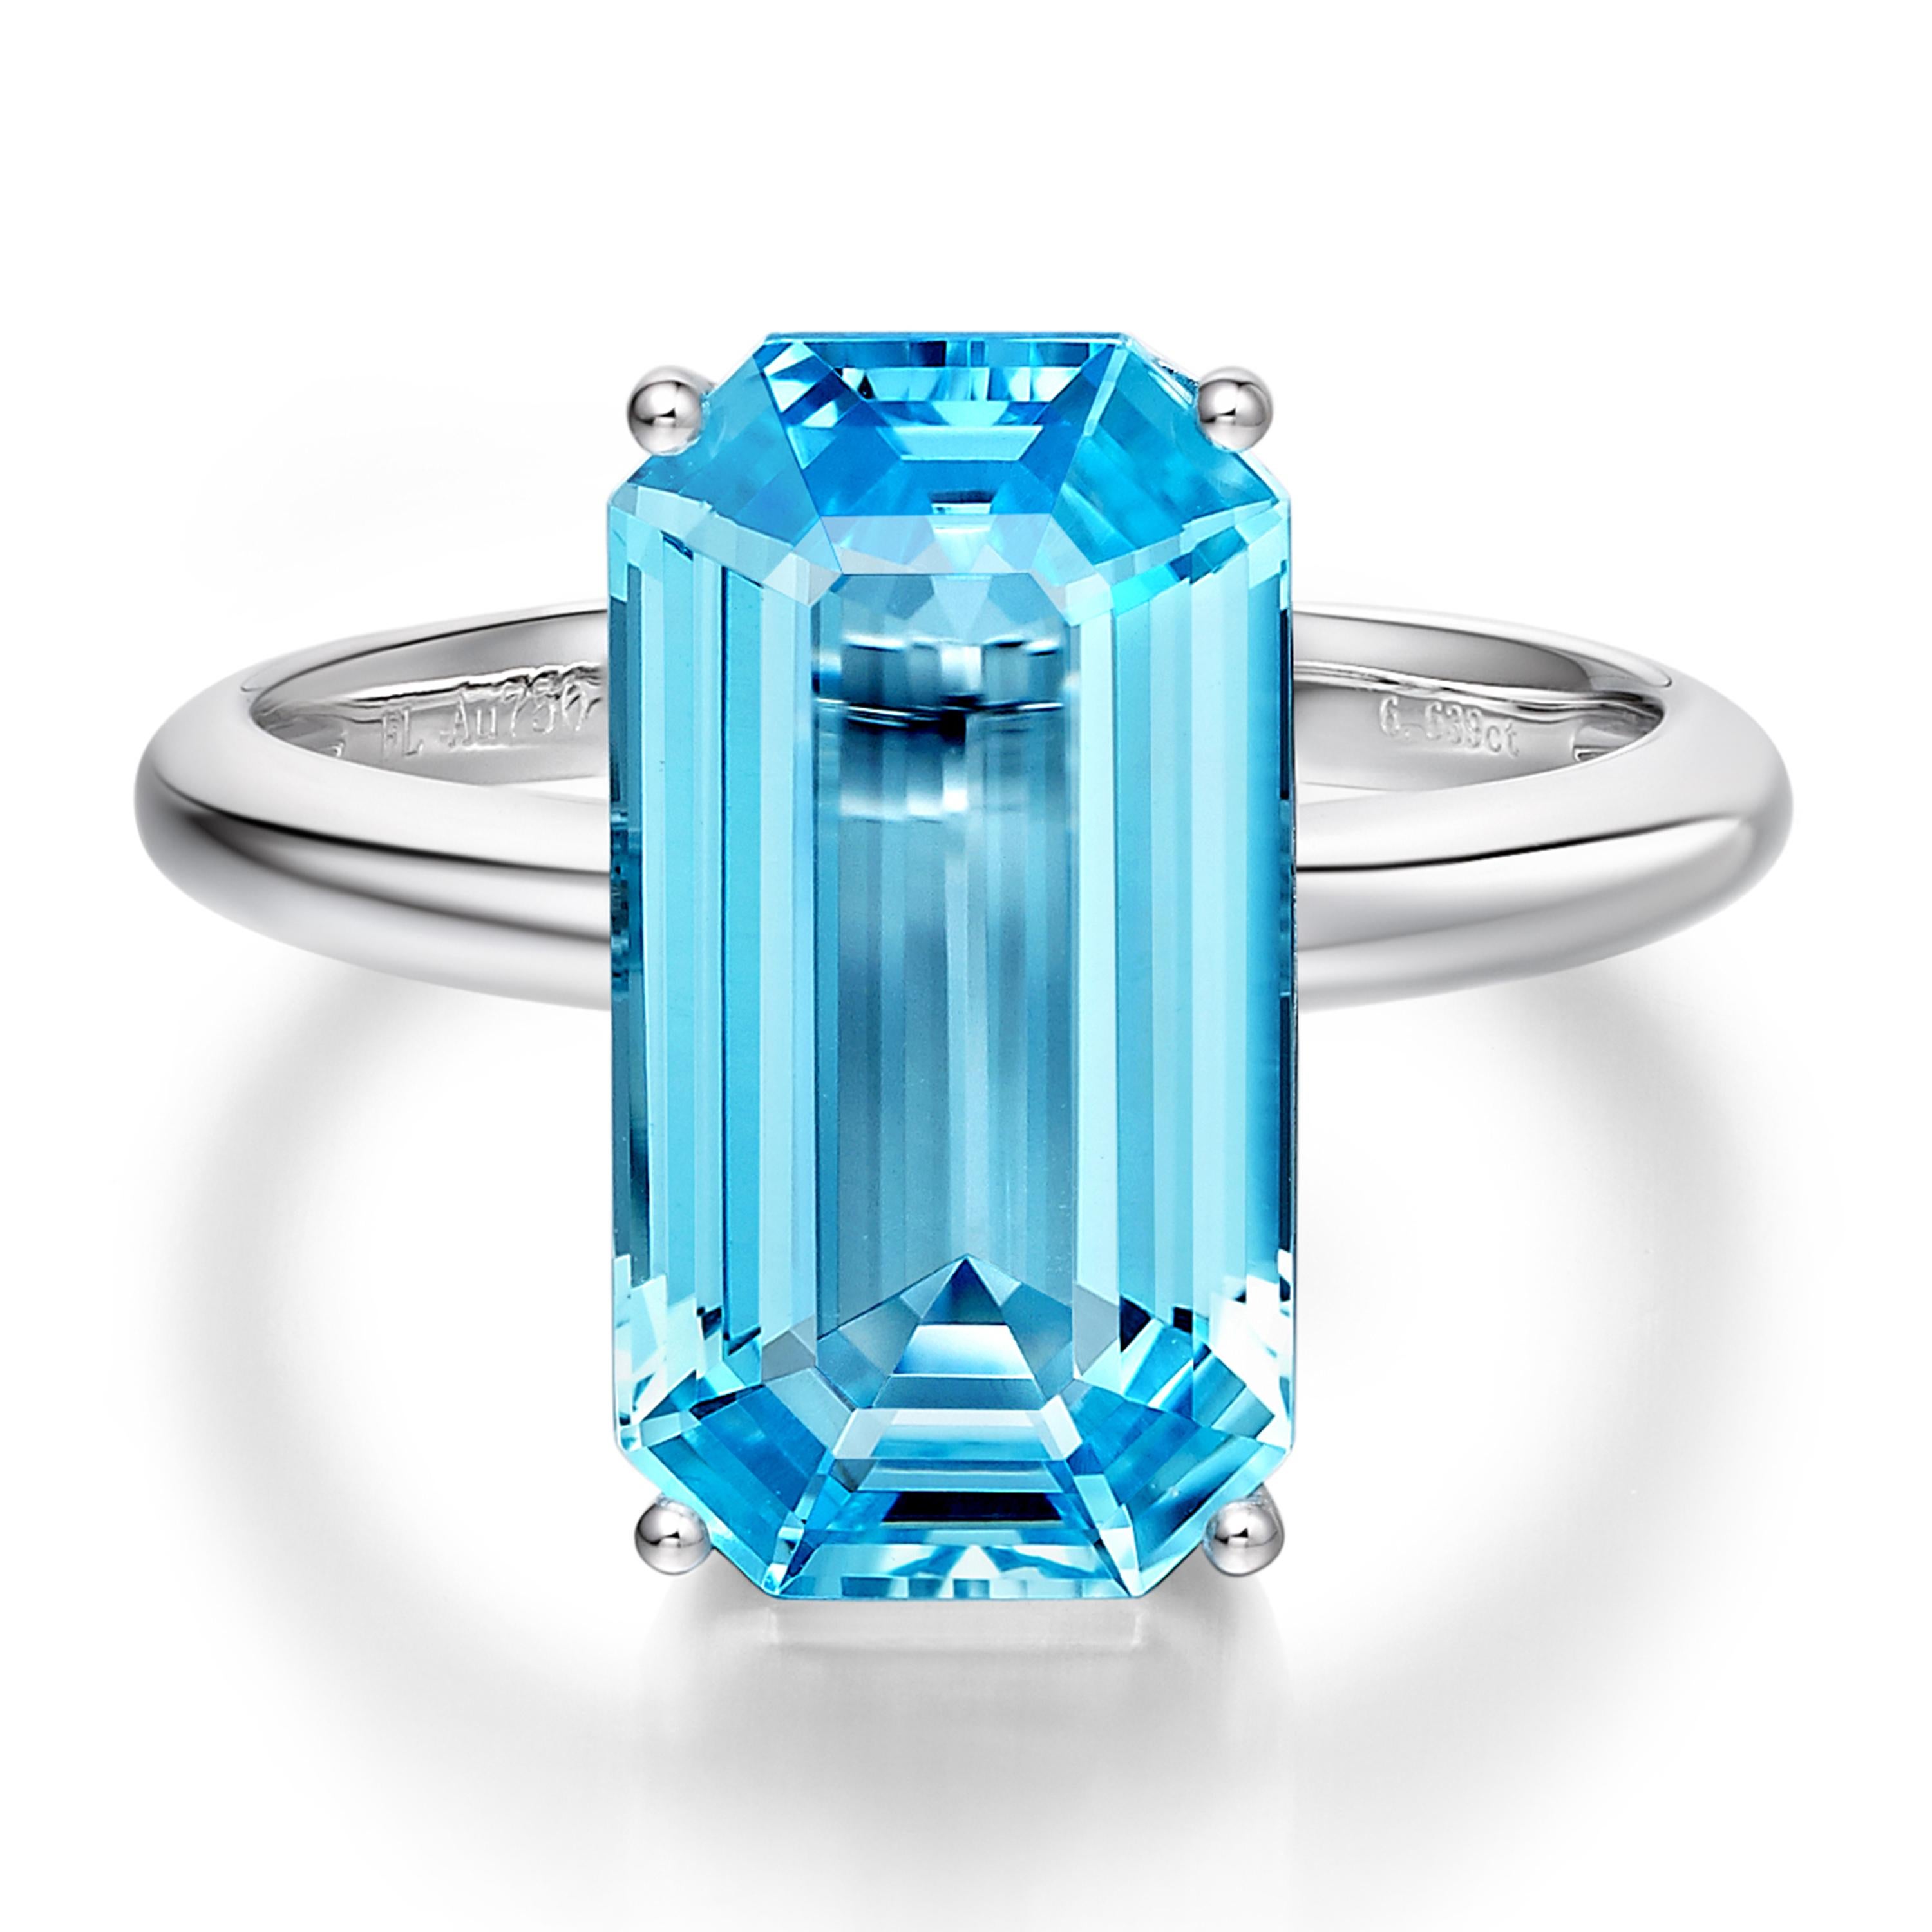 Description:
Victoriana emerald cut ring with 5.84ct blue topaz set in 18ct white gold.

Ring sizes available: N (UK) / 6+3/4 (US) 

Inspiration:
A deluxe 18ct gold collection inspired by Victorian design. Fei Liu’s Victoriana collection comprises